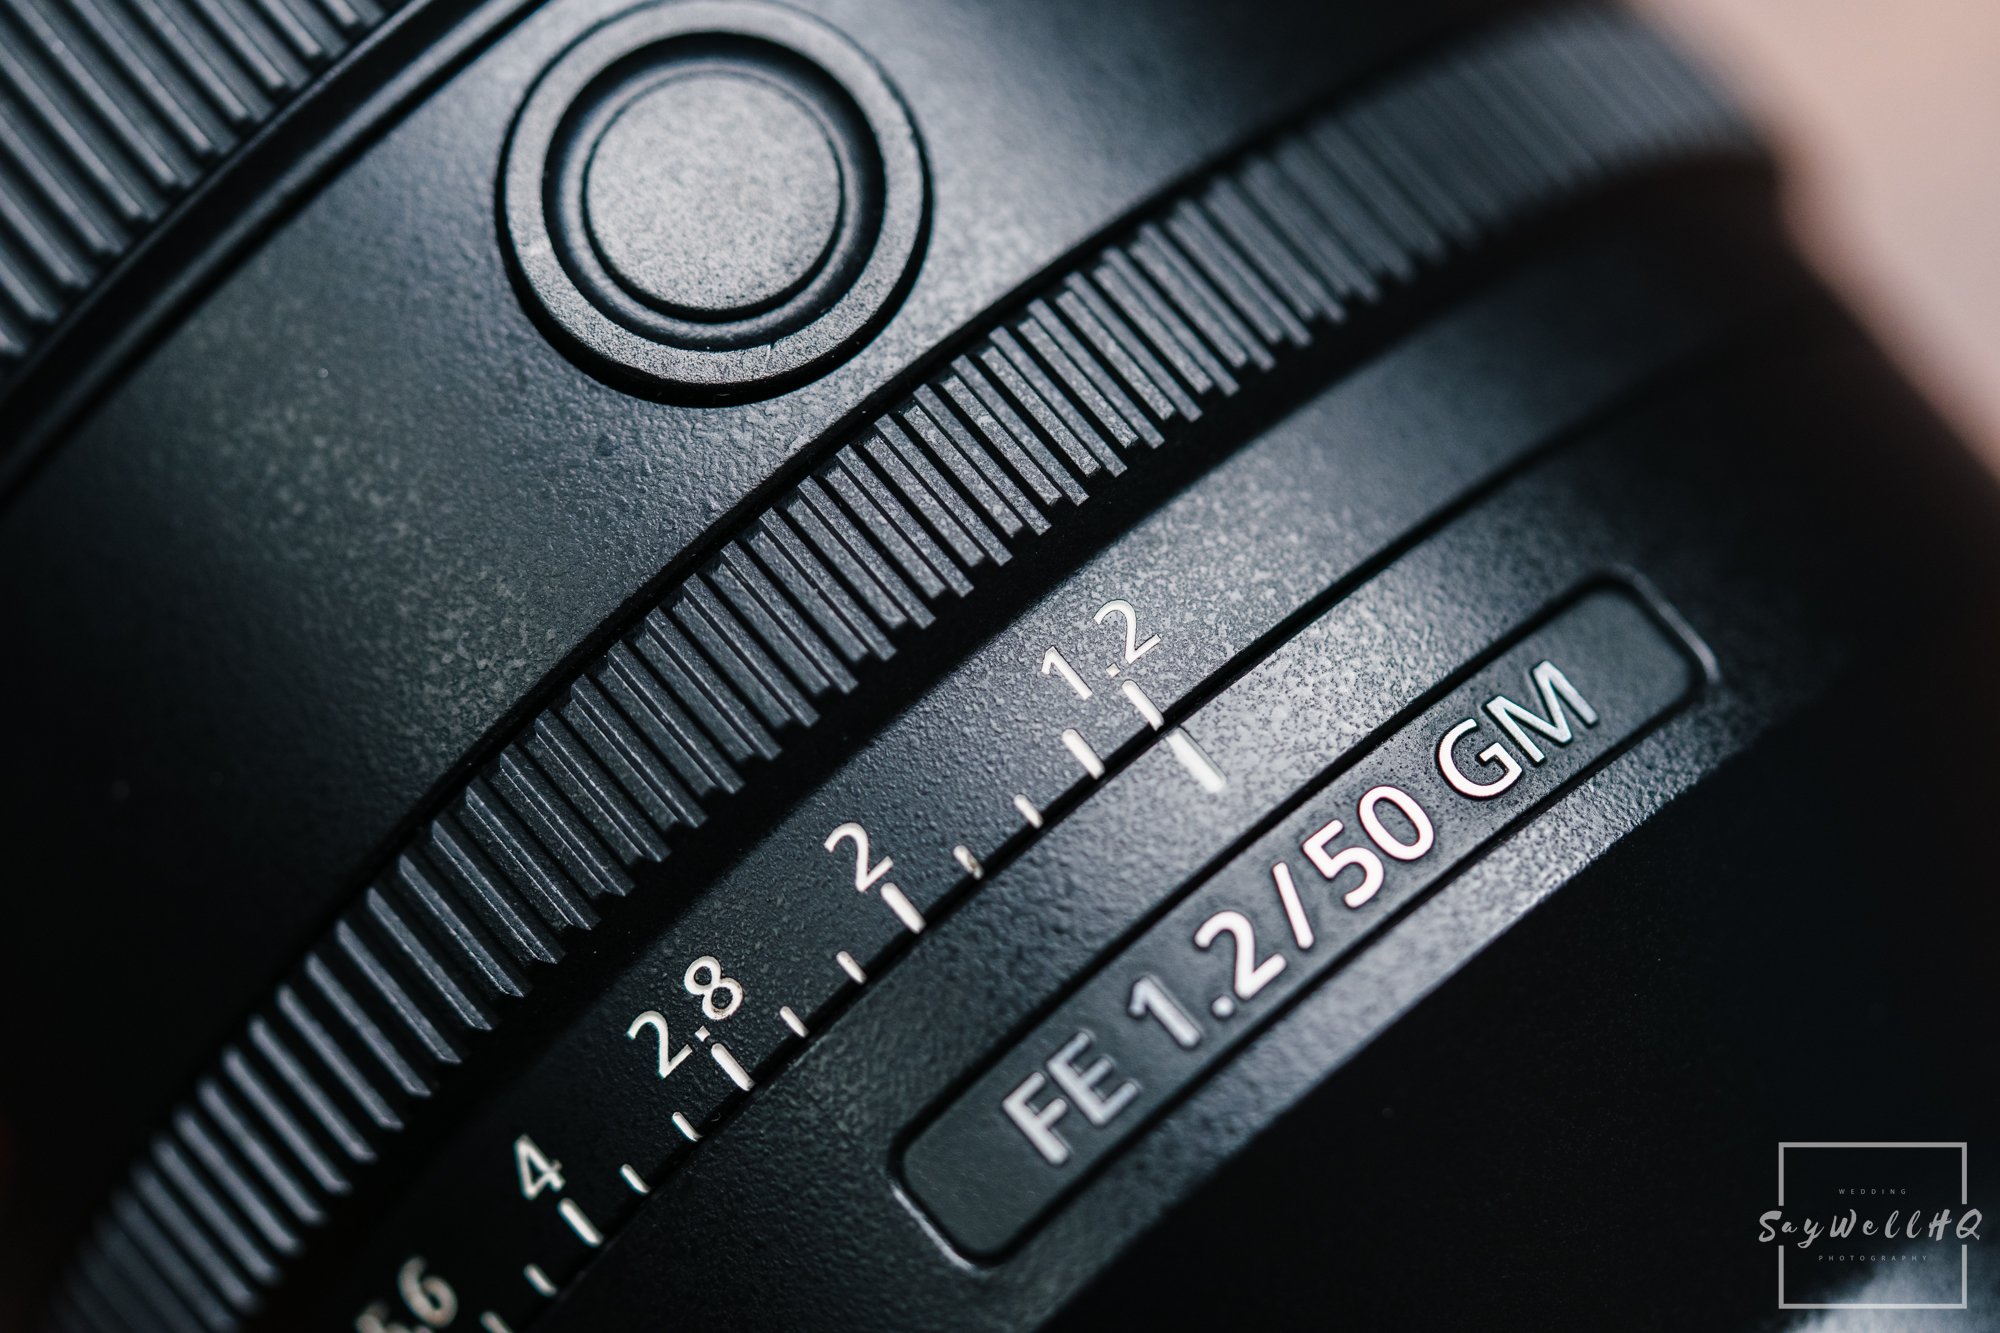  The All Important f1.2 Shown On The Aperture Ring 